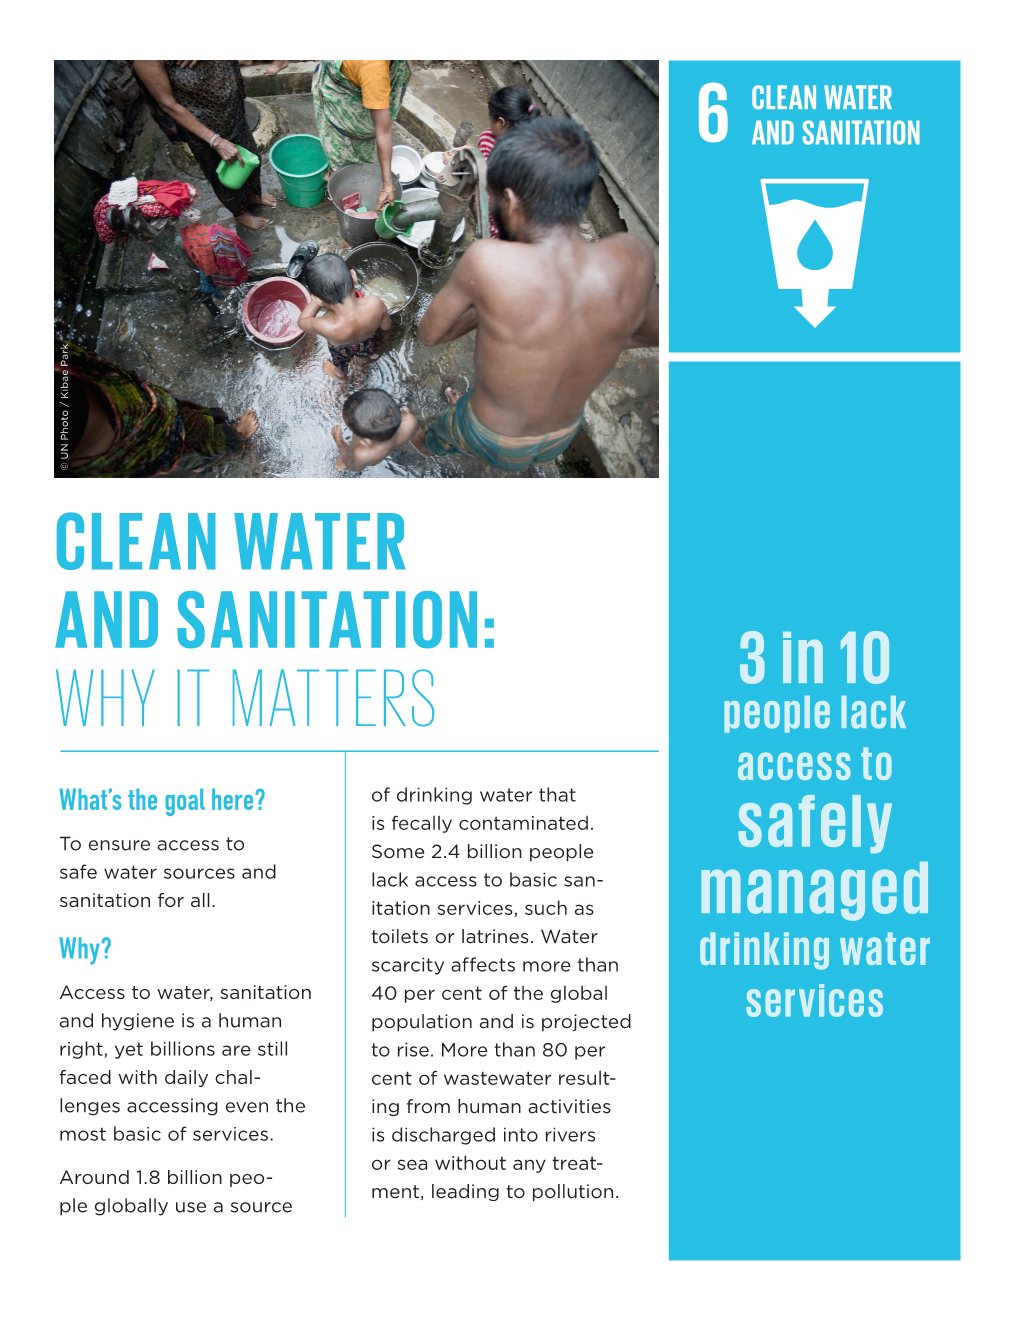 Clean Water and Sanitation: Why It Matters